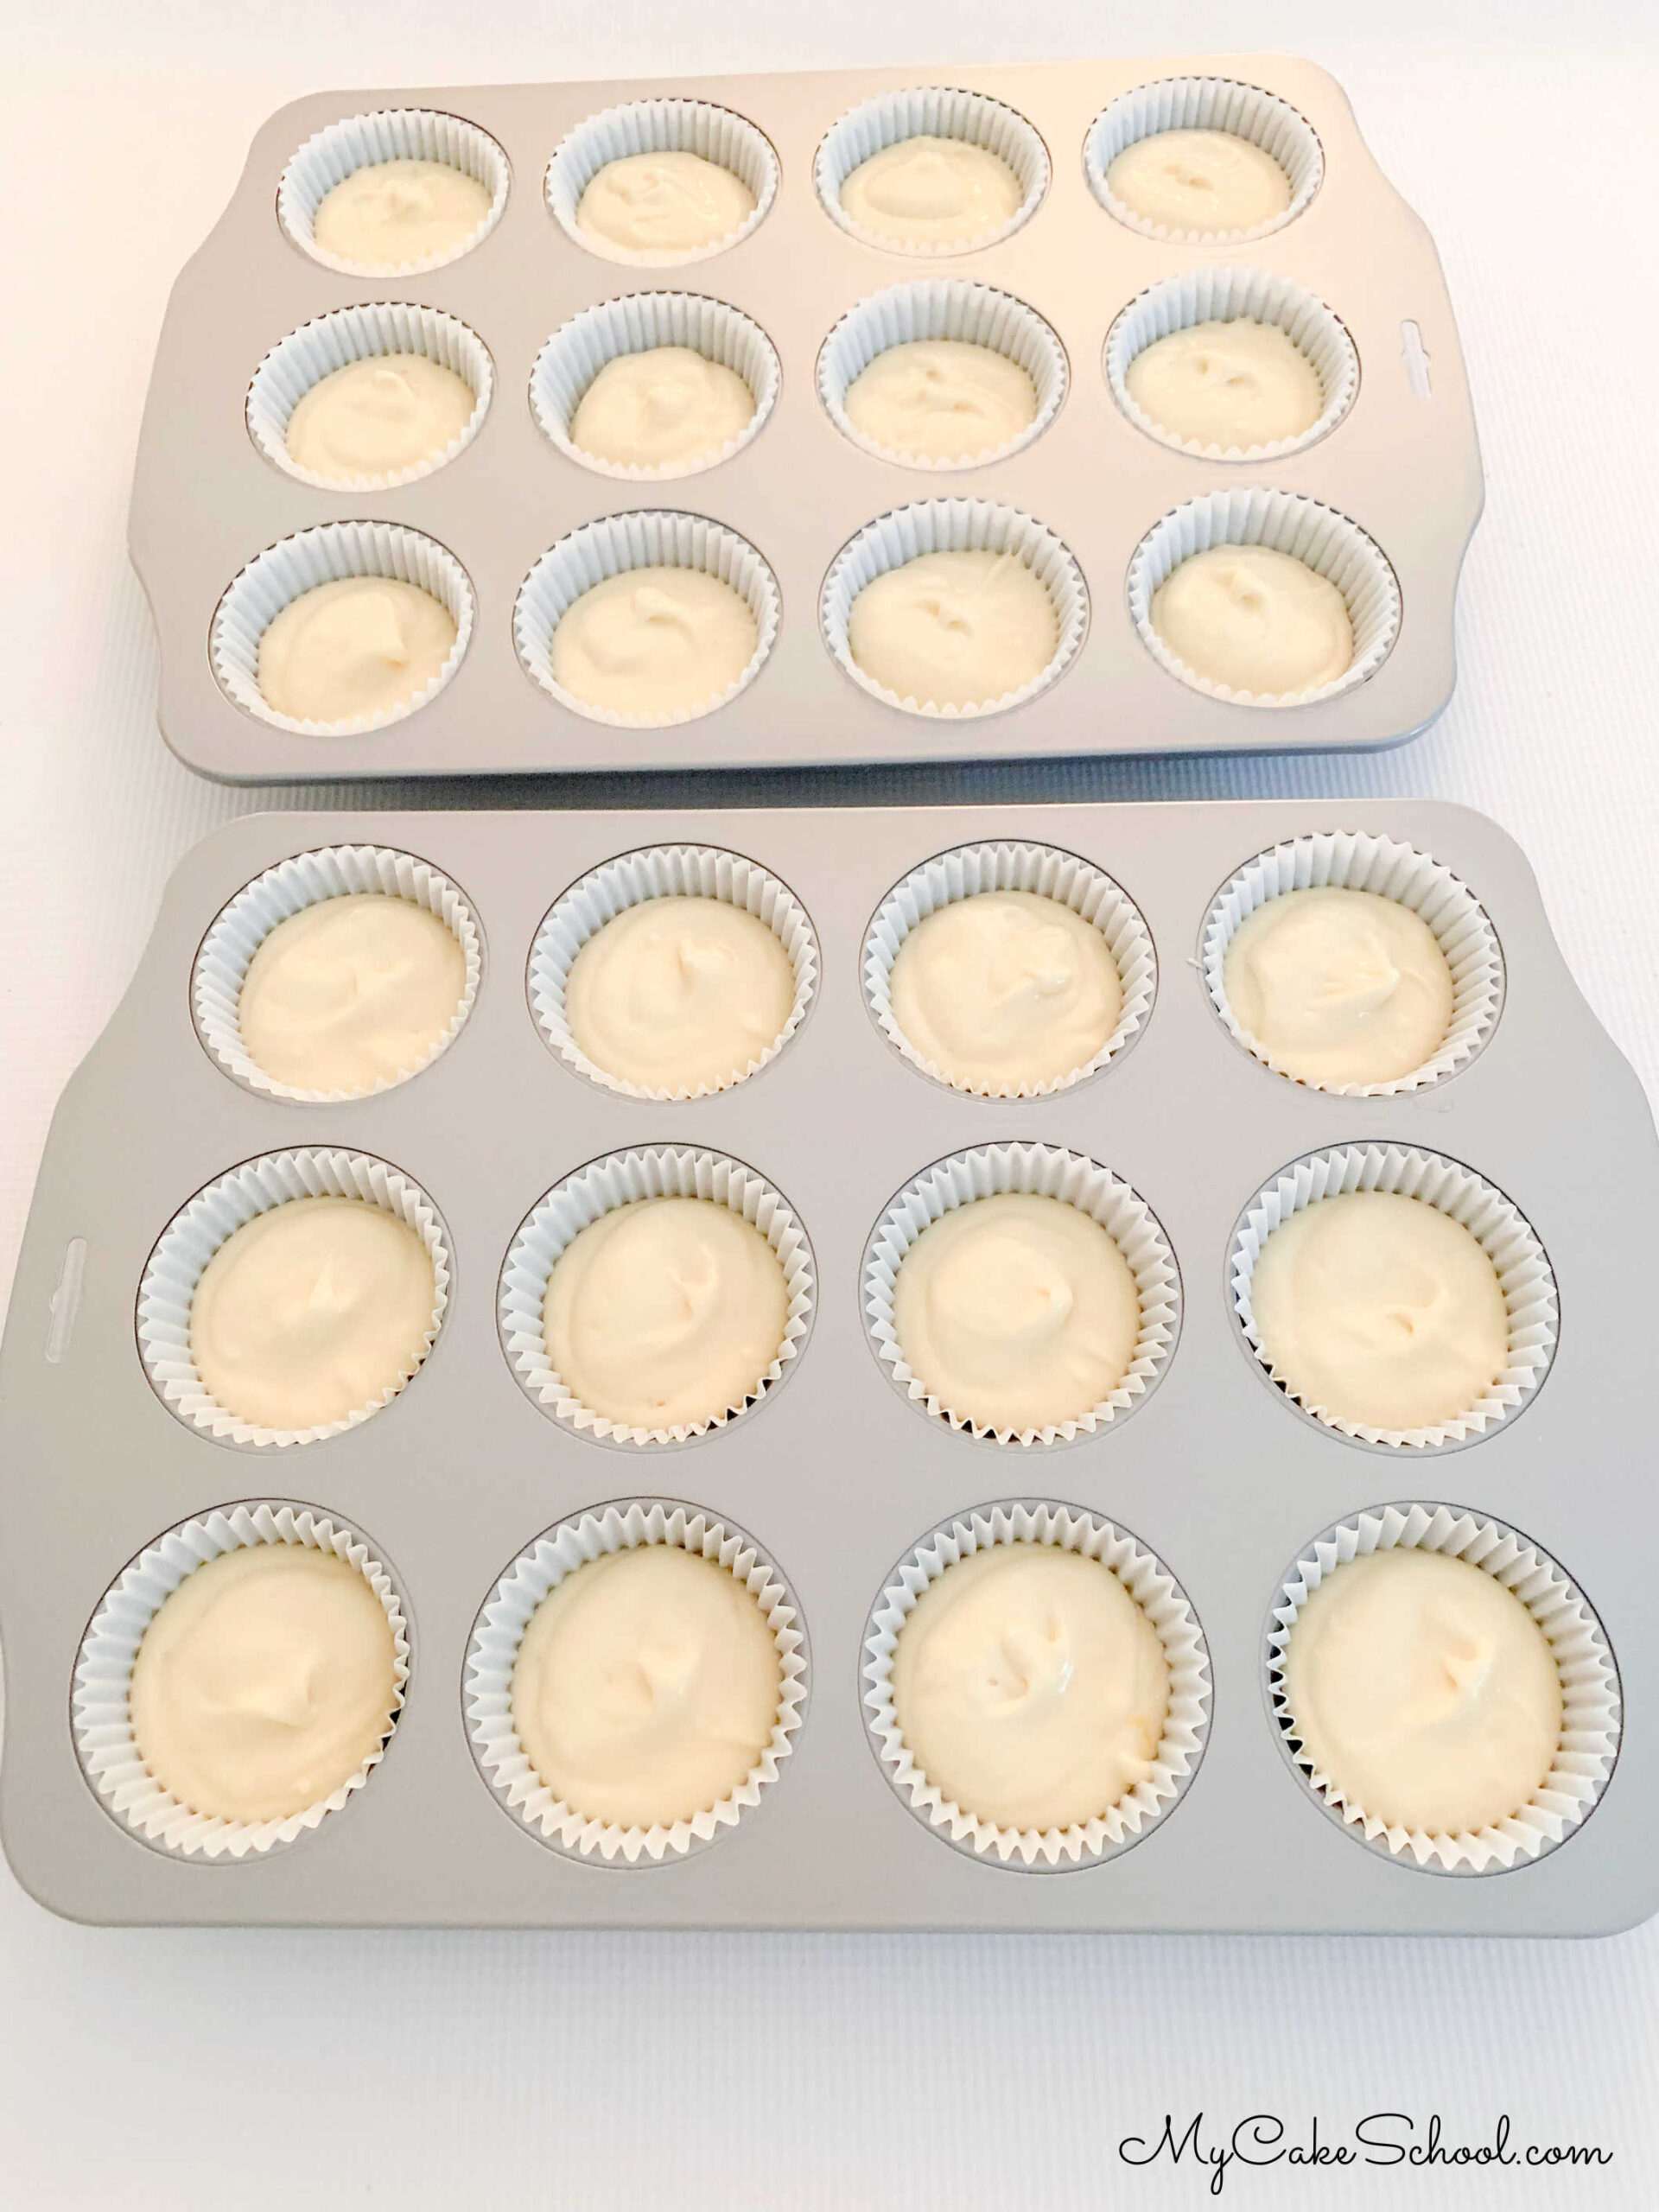 Two cupcake pans, lined with paper cupcake liners and filled with batter.